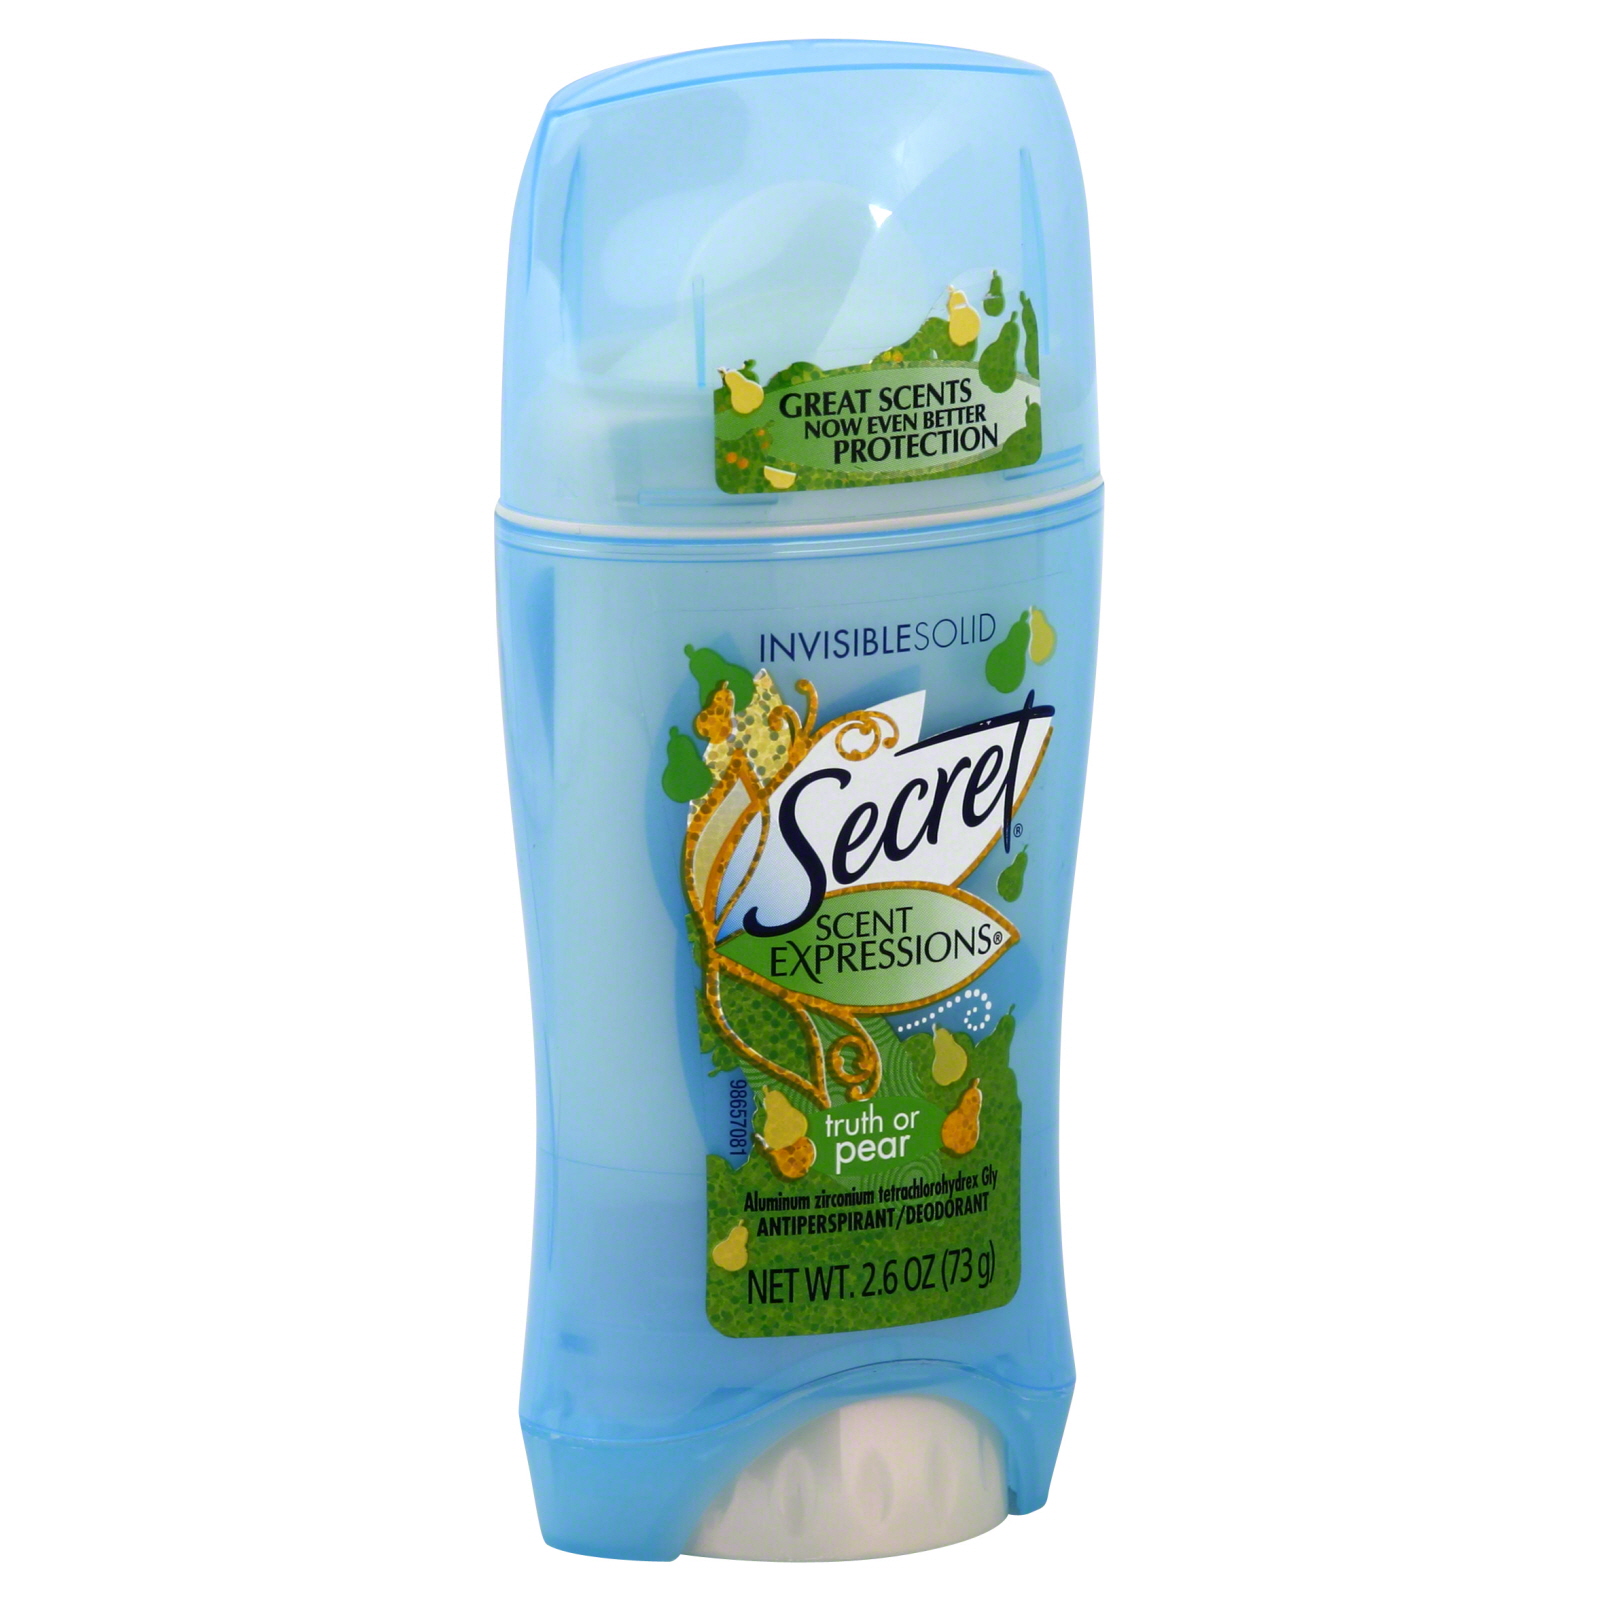 Secret Scent Expressions Antiperspirant/Deodorant, Invisible Solid, Truth or Pear, 2.6 oz (73 g)